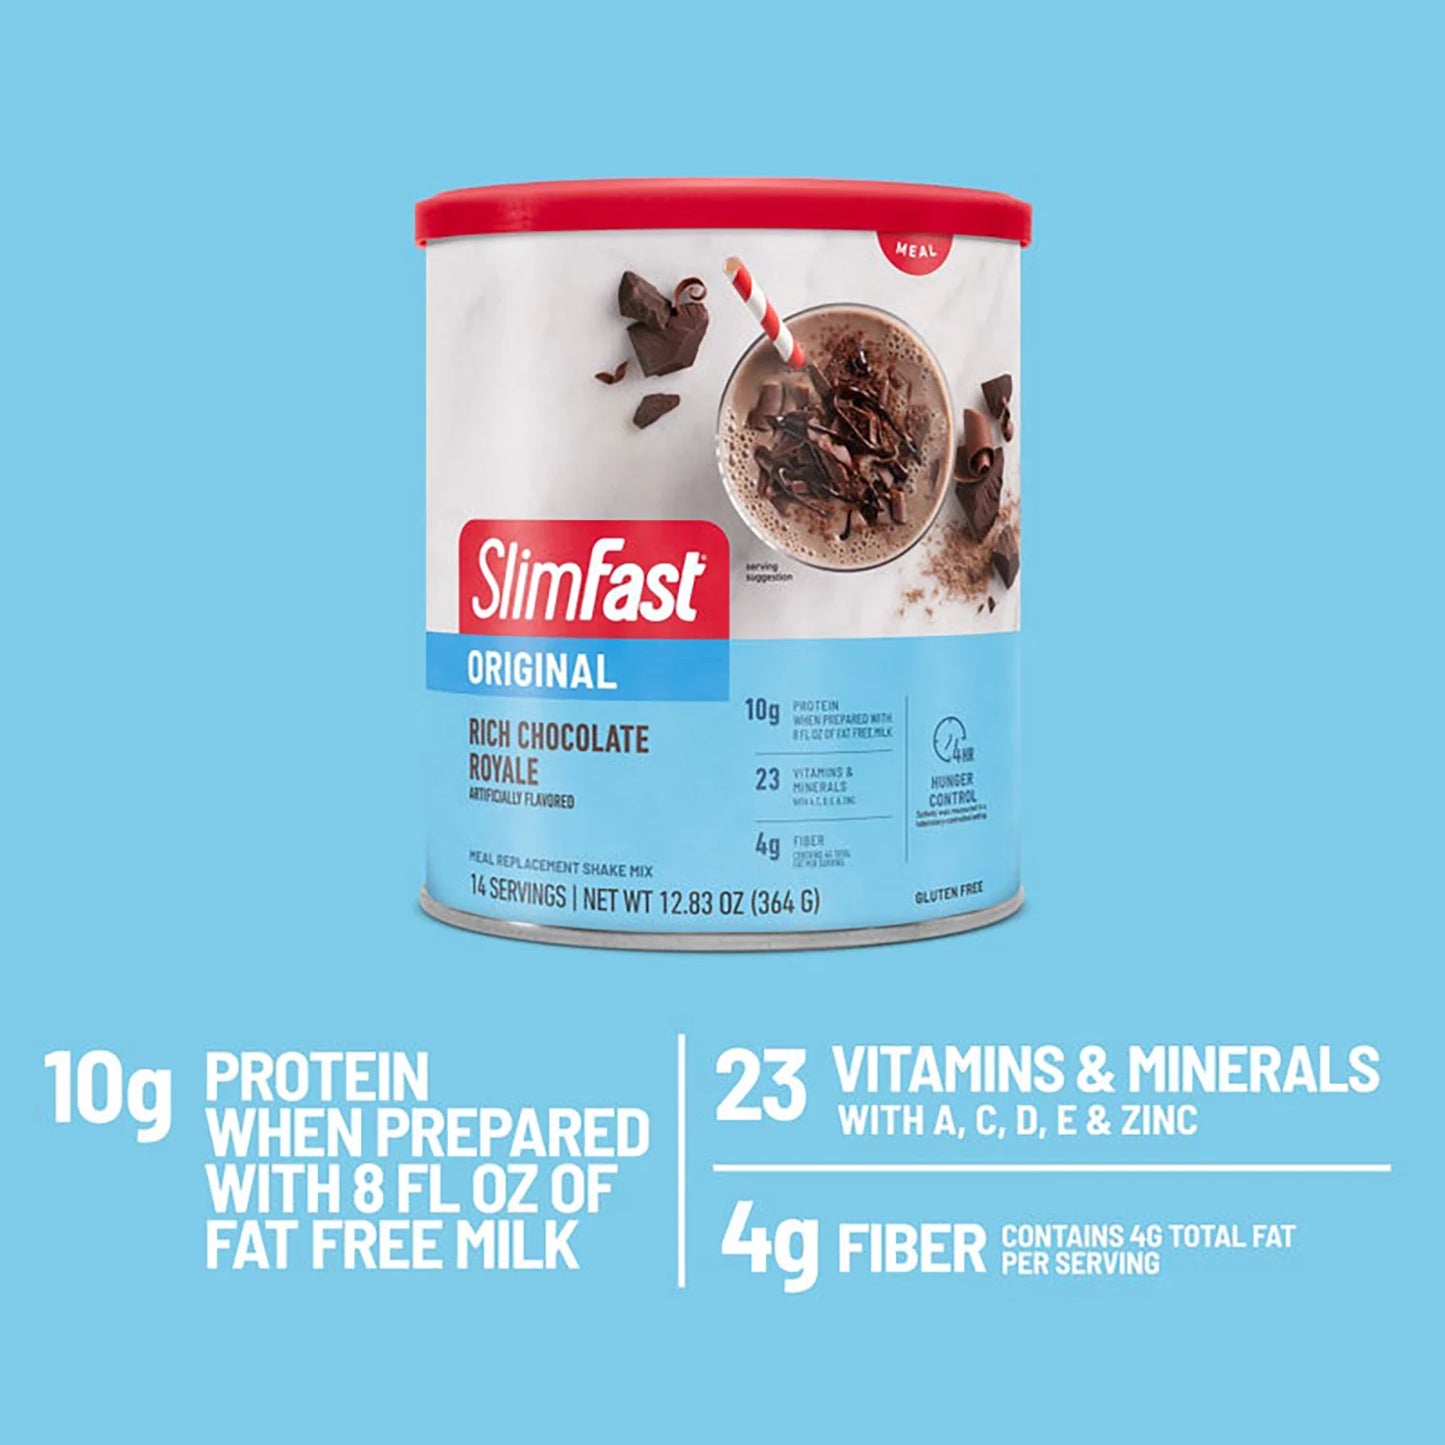 SlimFast Original 10g Protein Meal Replacement Shake Mix, Chocolate Royale 34 Servings, 31.18 oz.